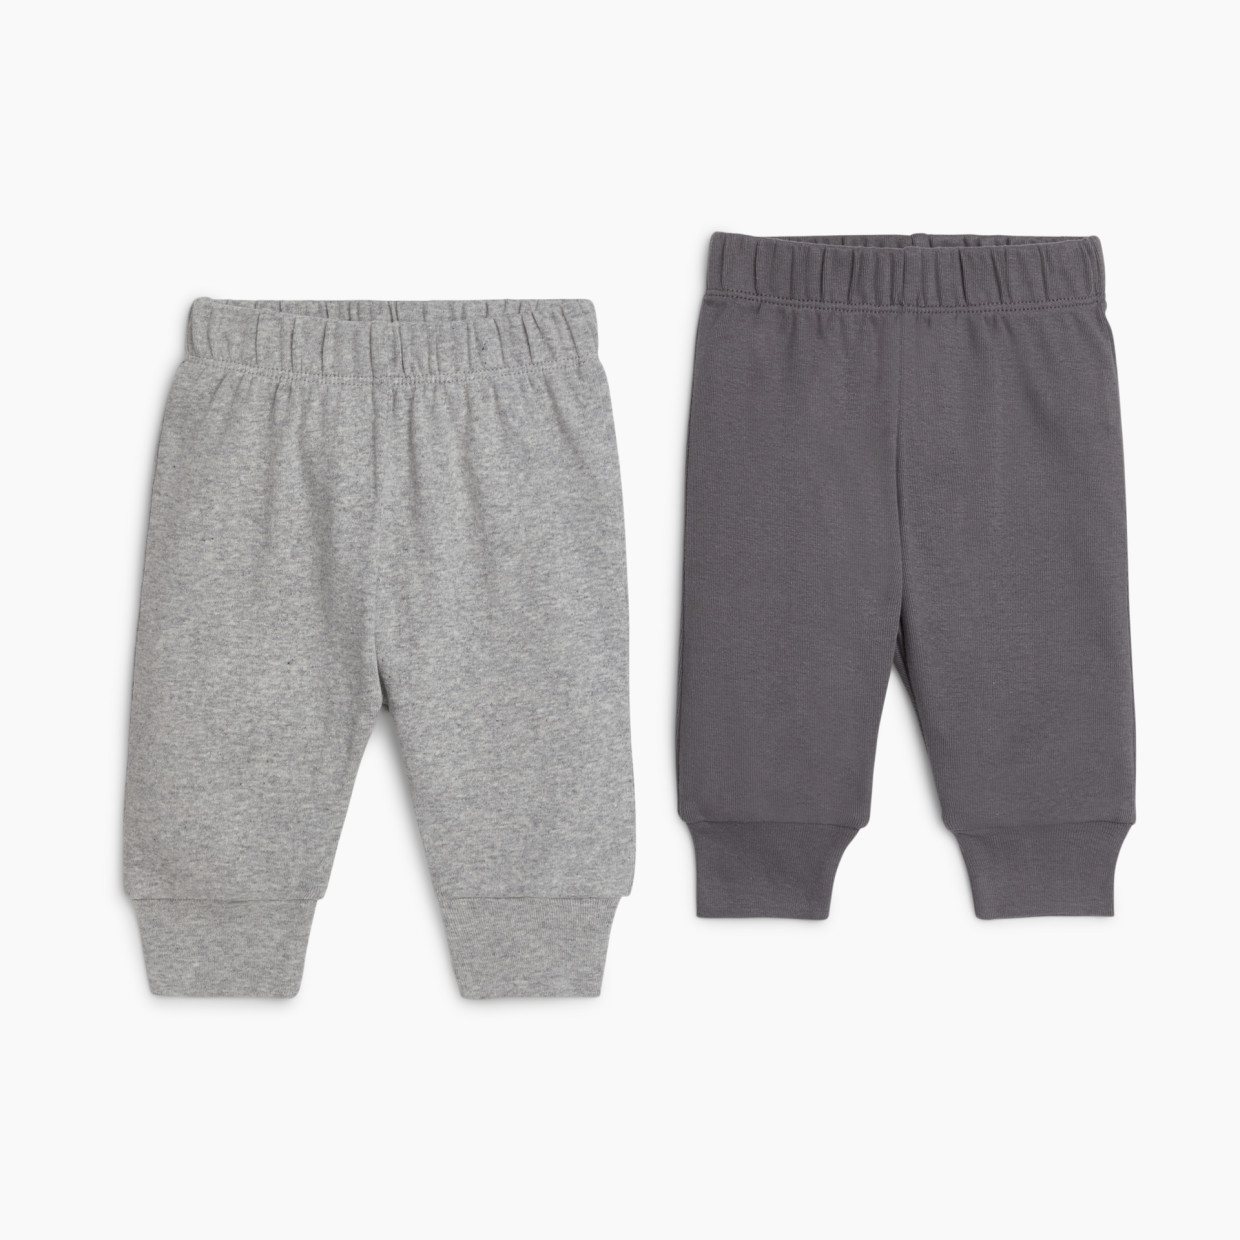 Small Story Pants (2 Pack) - Heather Grey/Charcoal, 3-6 M.